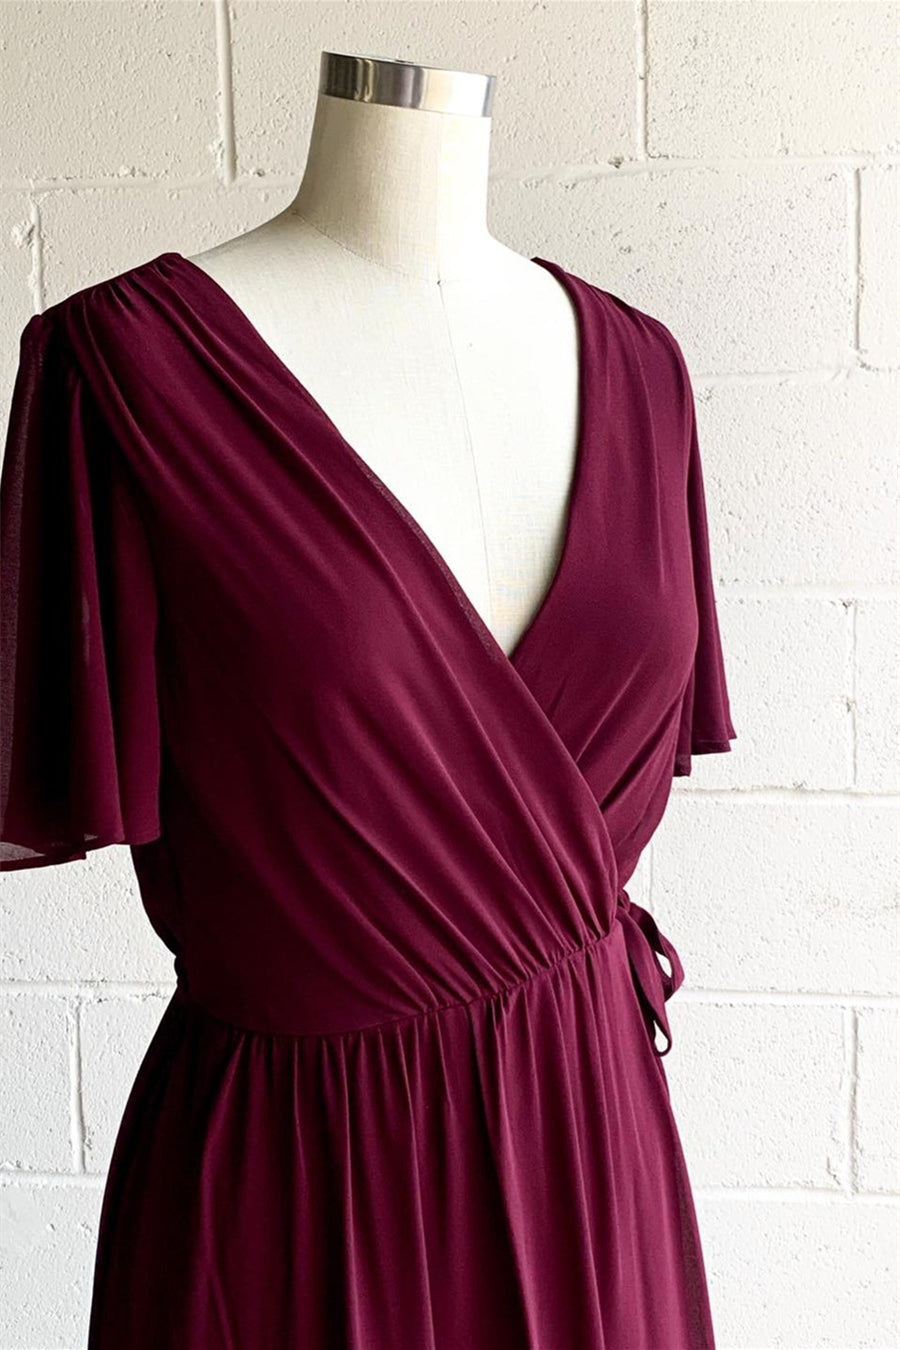 Formal Dress Shops Near Me, Faux-Wrap V Neck Pleated Chiffon Hi-Low Bridesmaid Dress with Sleeves